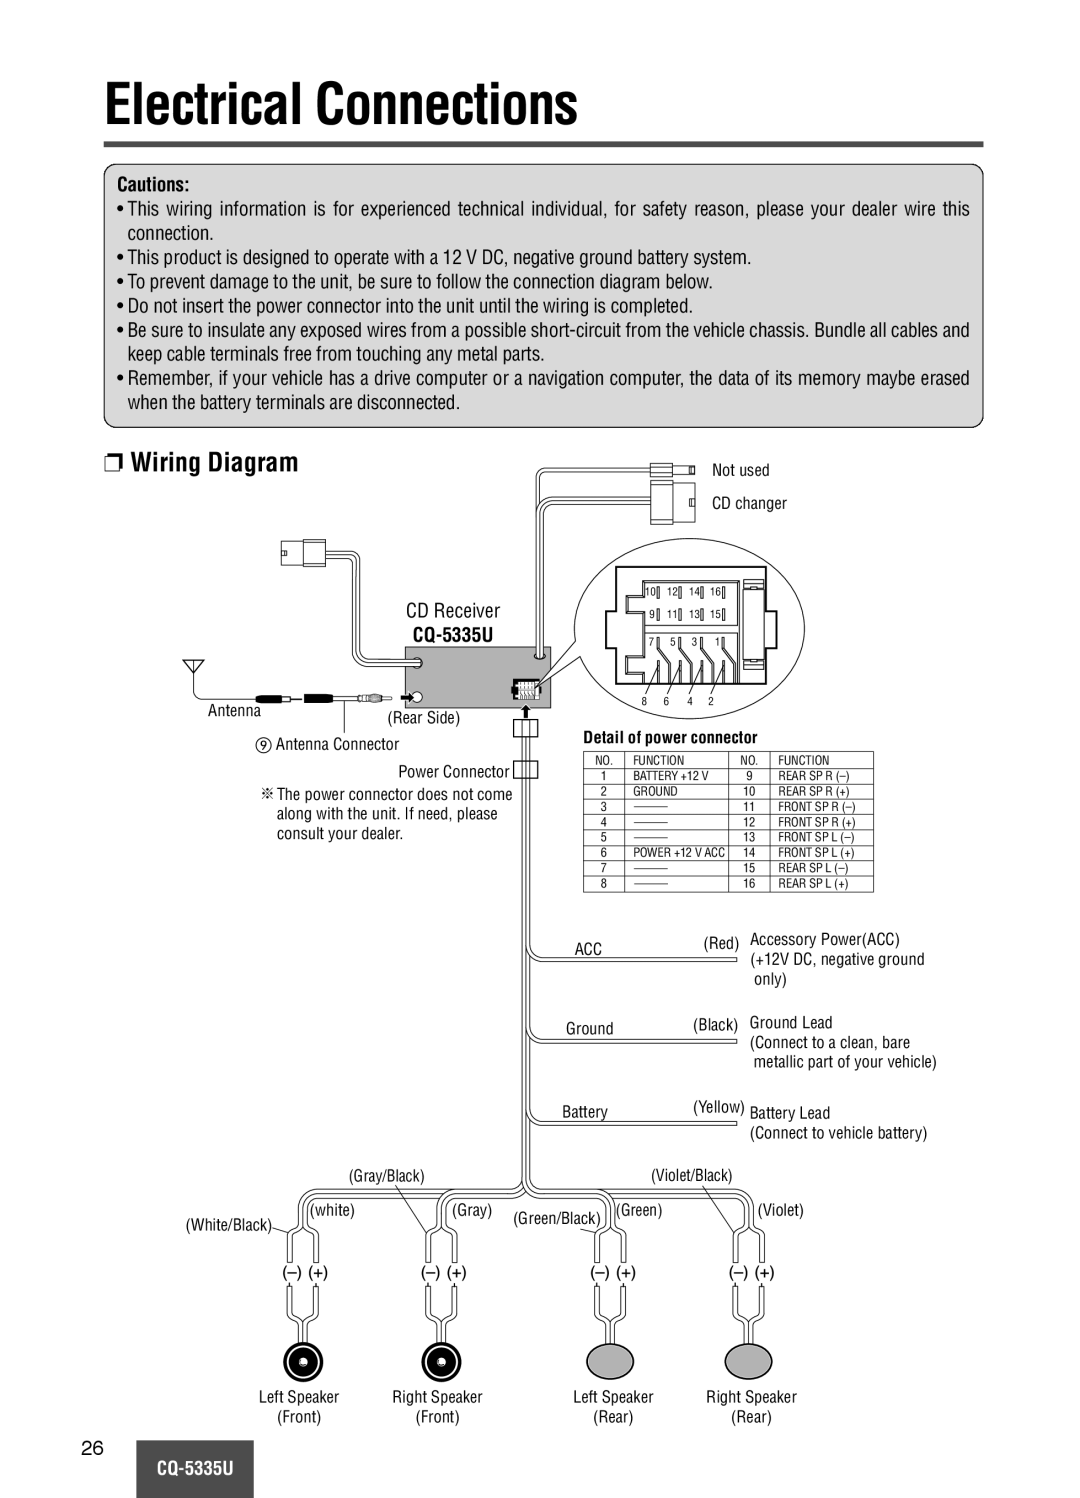 Panasonic CQ-5335U operating instructions Electrical Connections, Wiring Diagram 